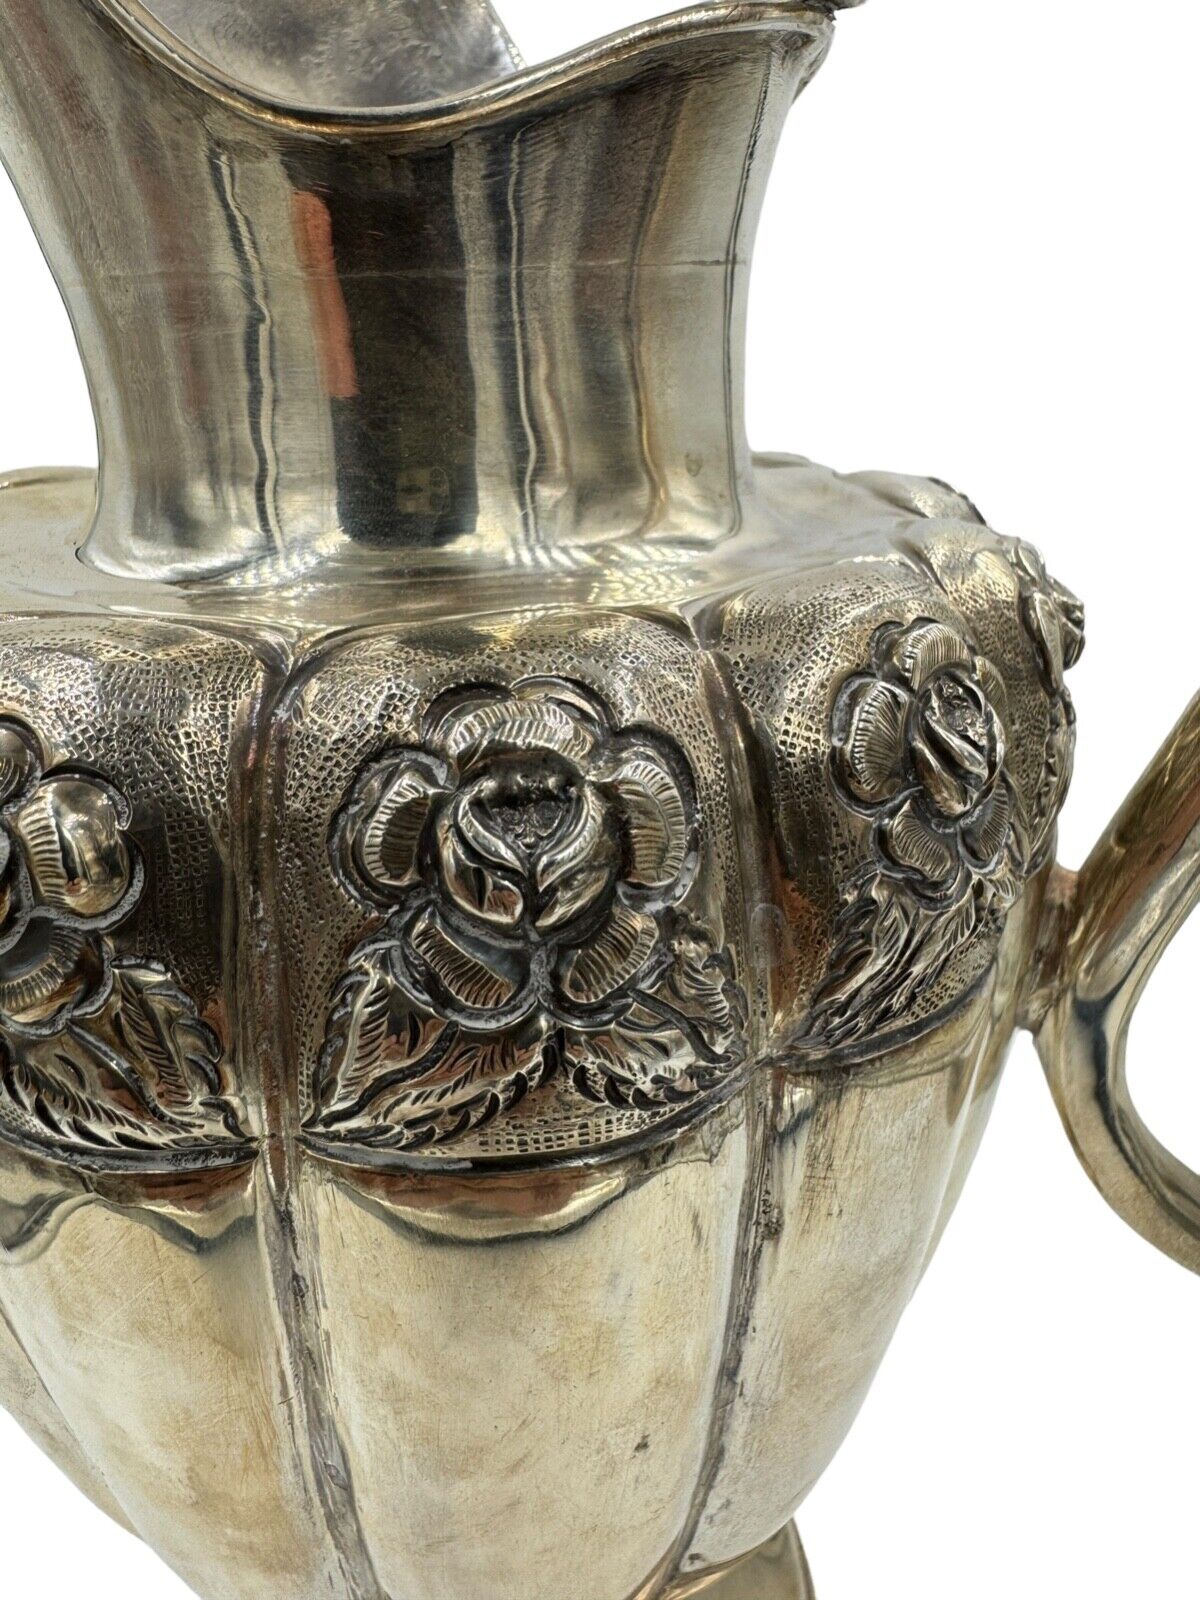 1940's Sterling Silver Water Pitcher From Mexico Fish Handle 11"